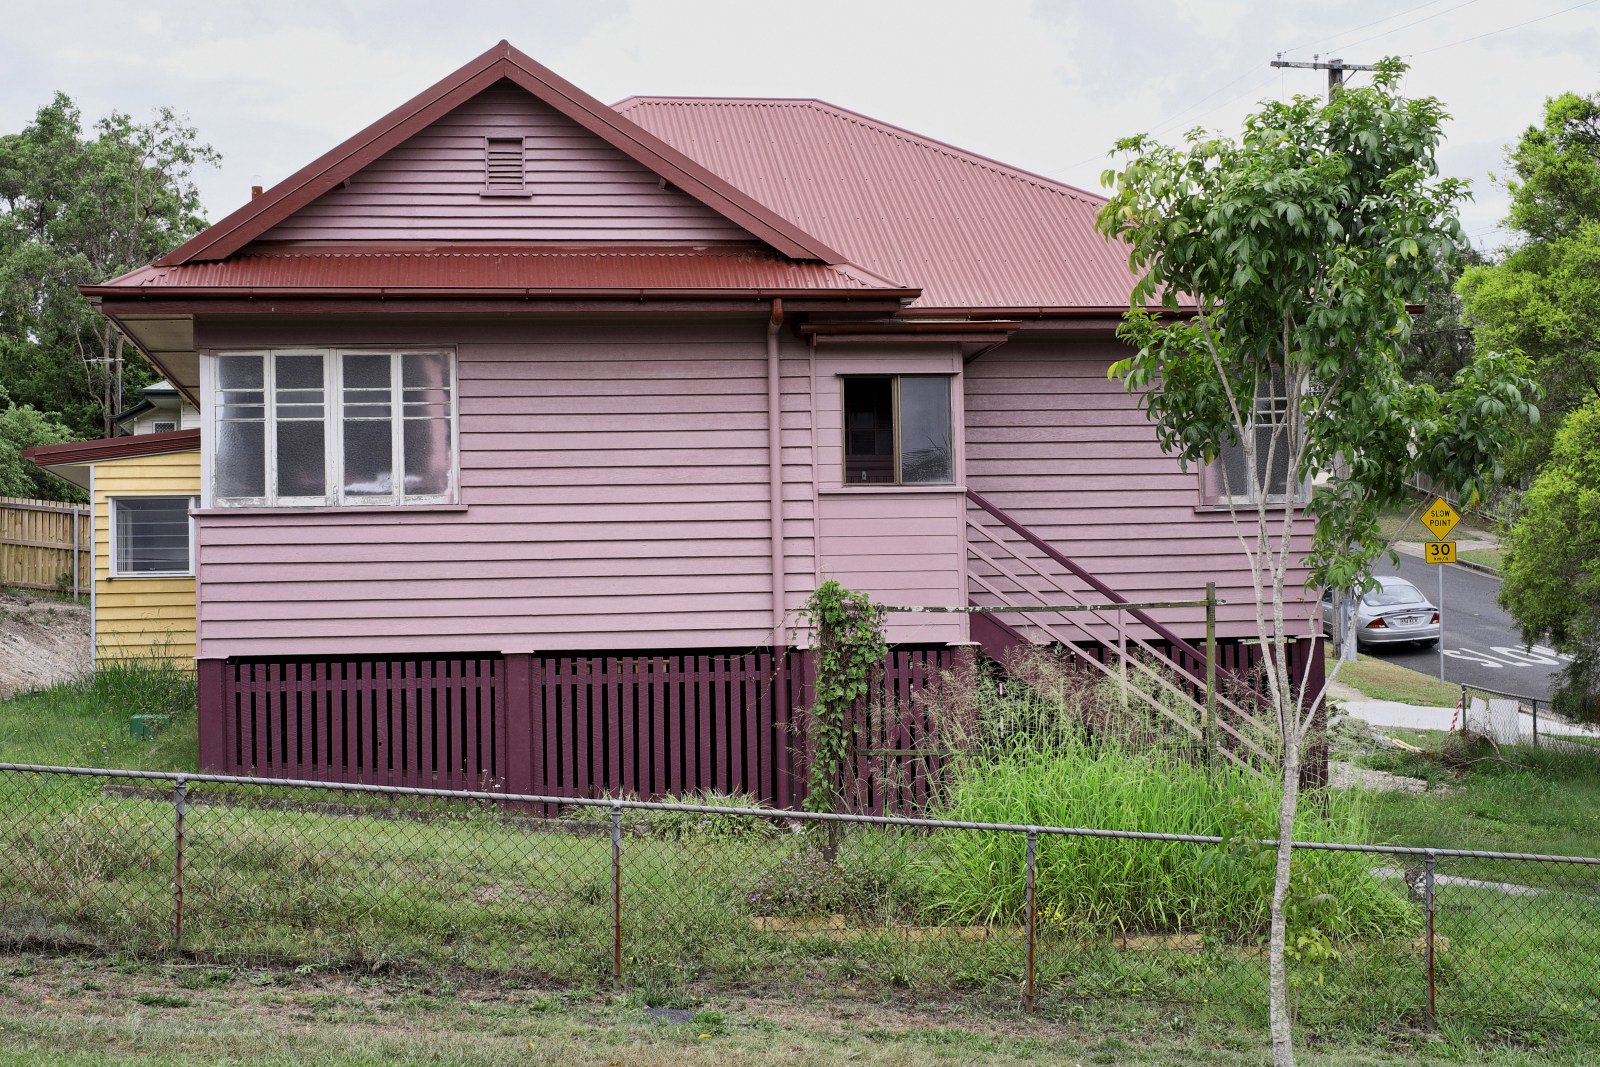 Traditional 40's 50's weatherboard home, in Carina. Brisbane vernacular architecture.